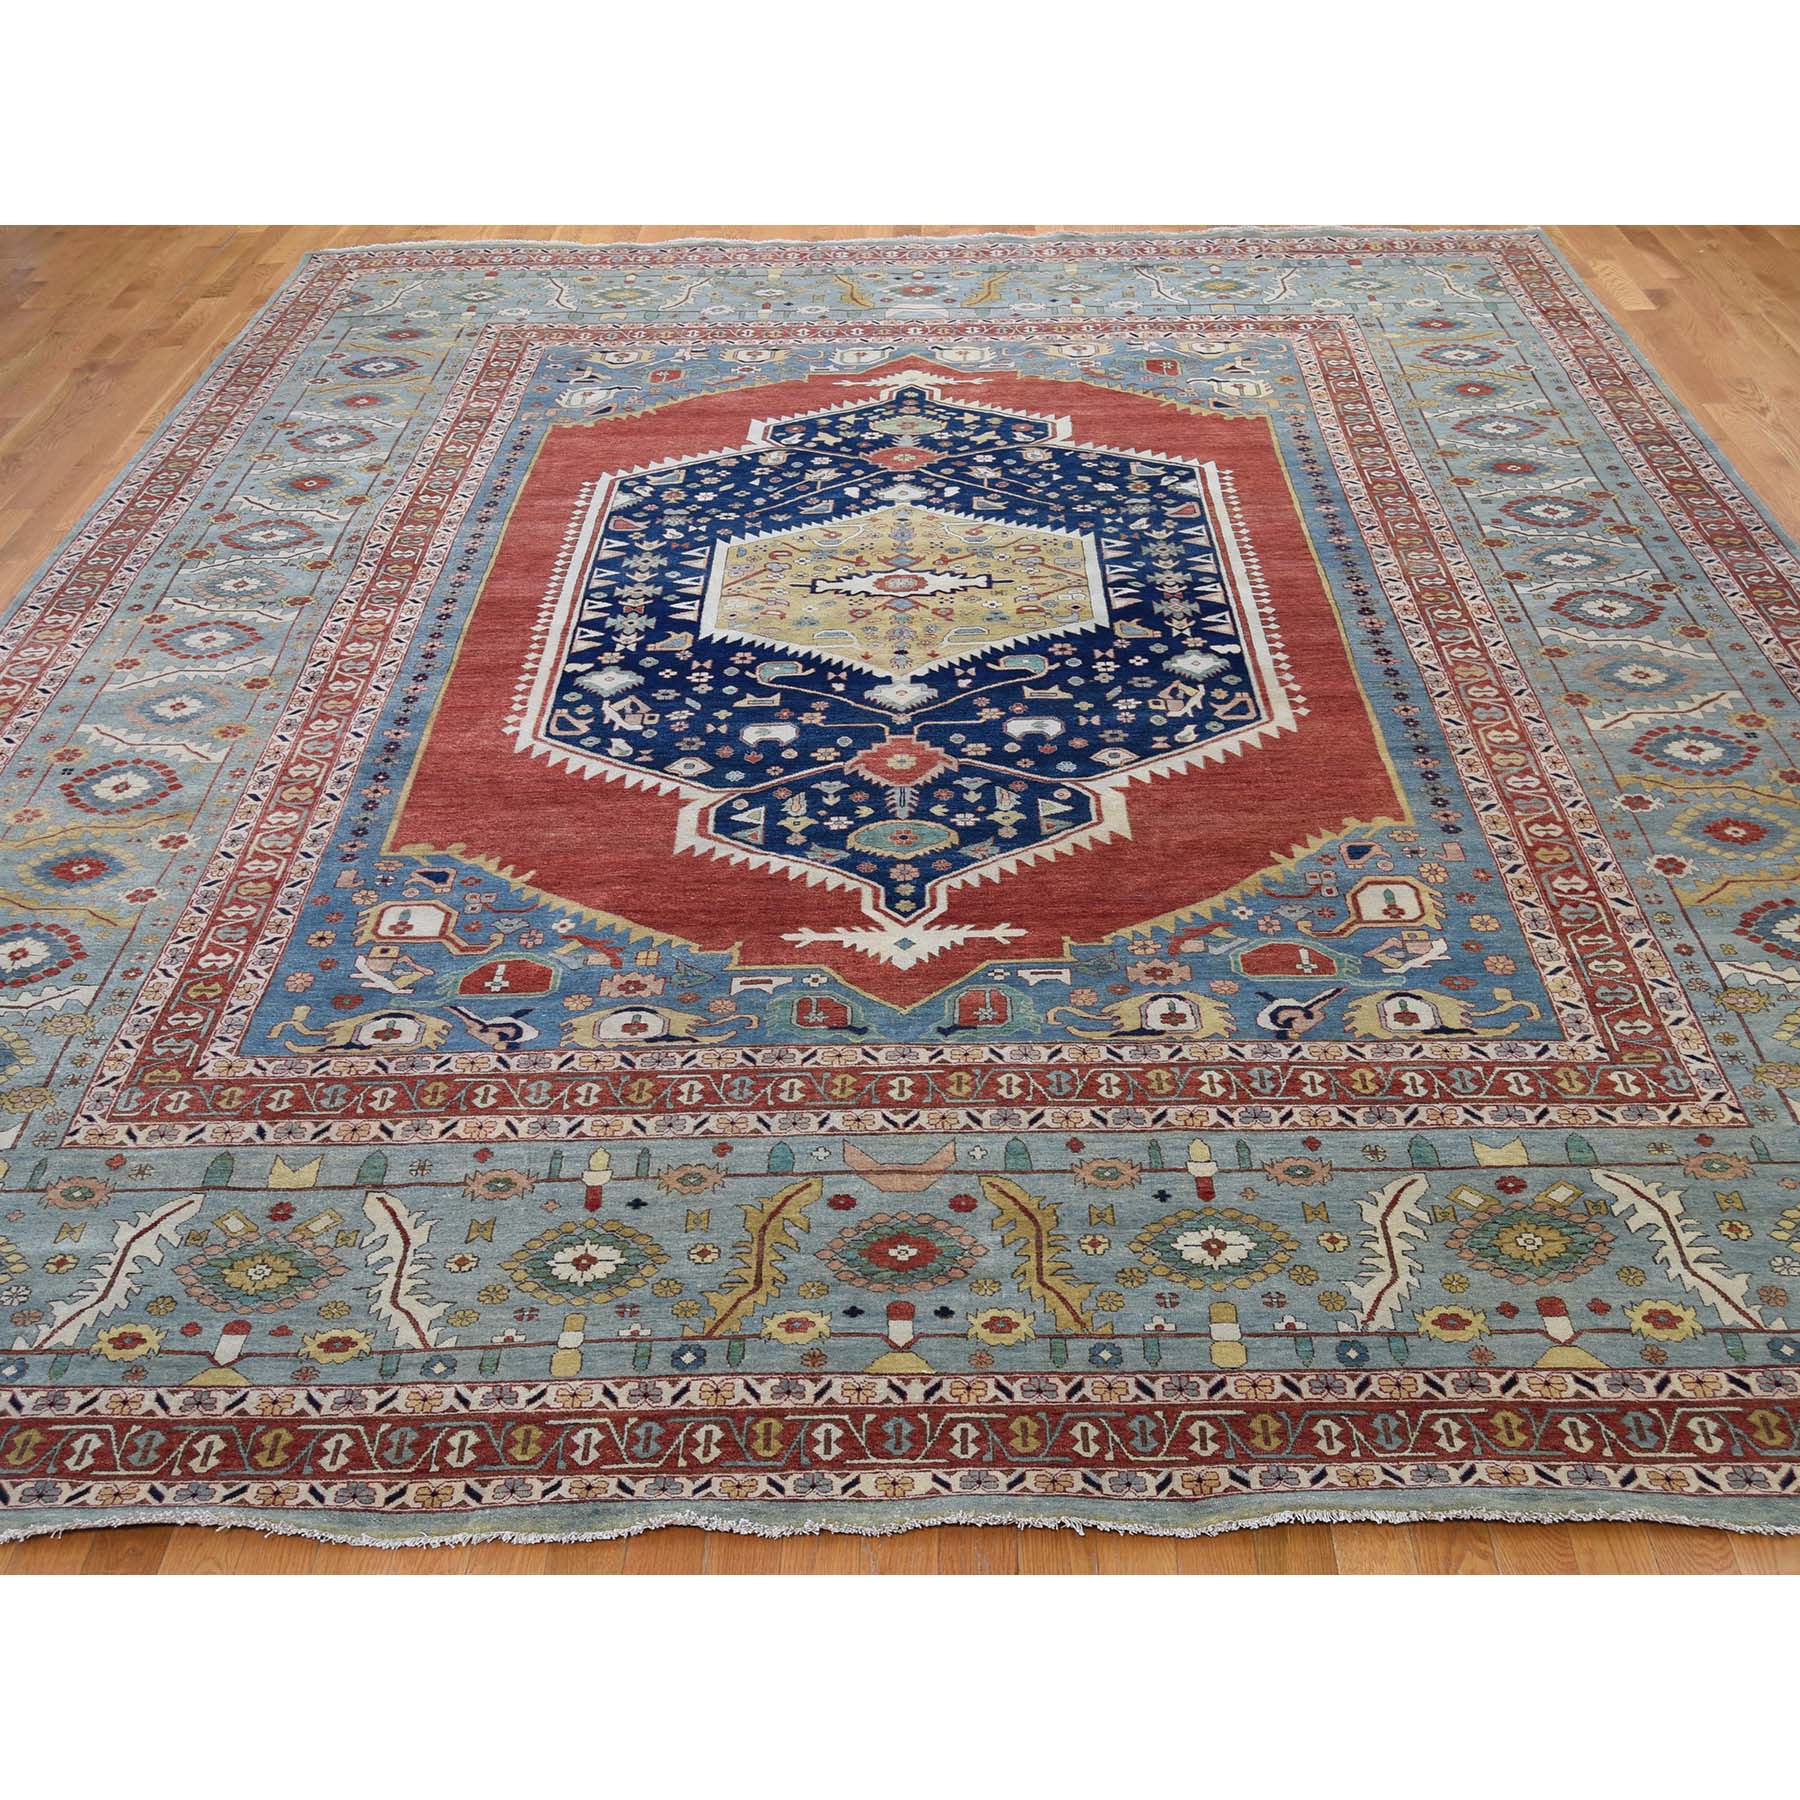 11-9 x14-10  Antiqued Bakshaish Re-creation Pure Wool Oversize Hand-Knotted Oriental Rug 